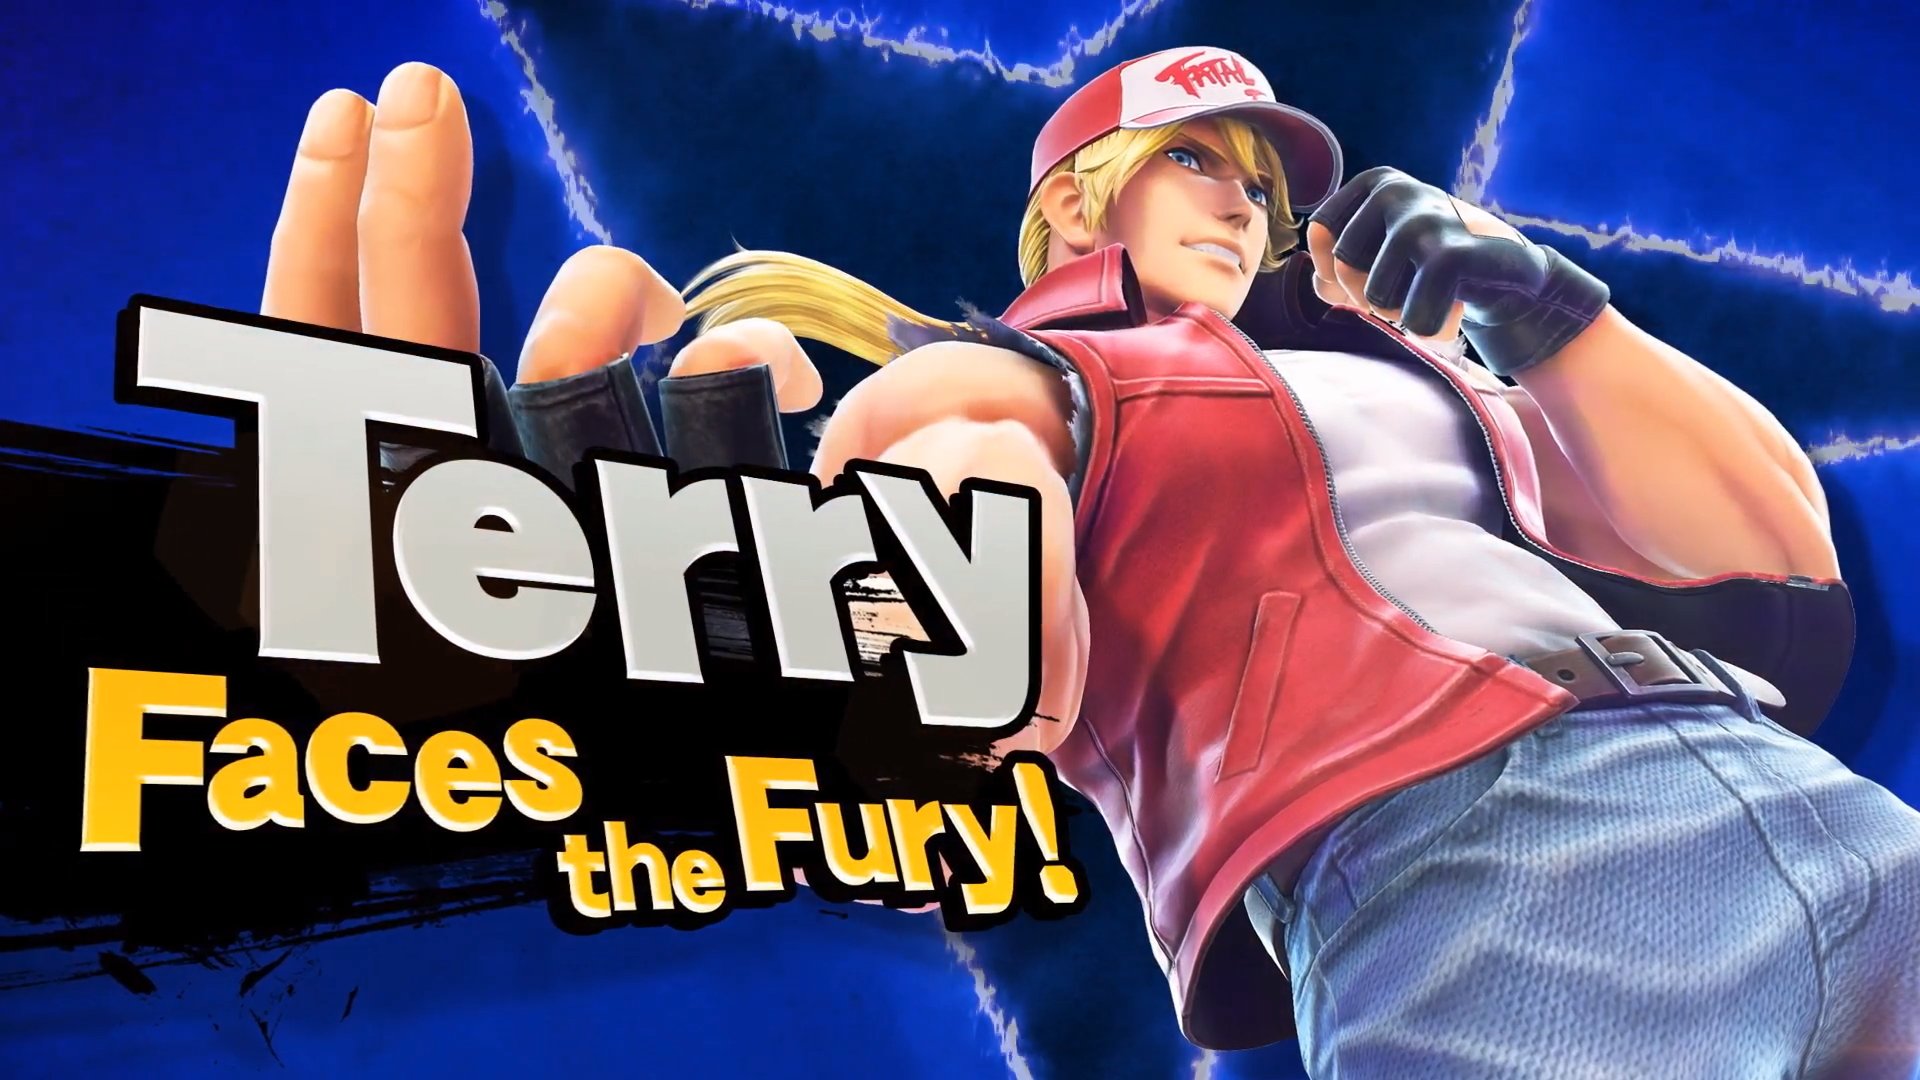 Fatal Fury Terry Bogard Wallpapers